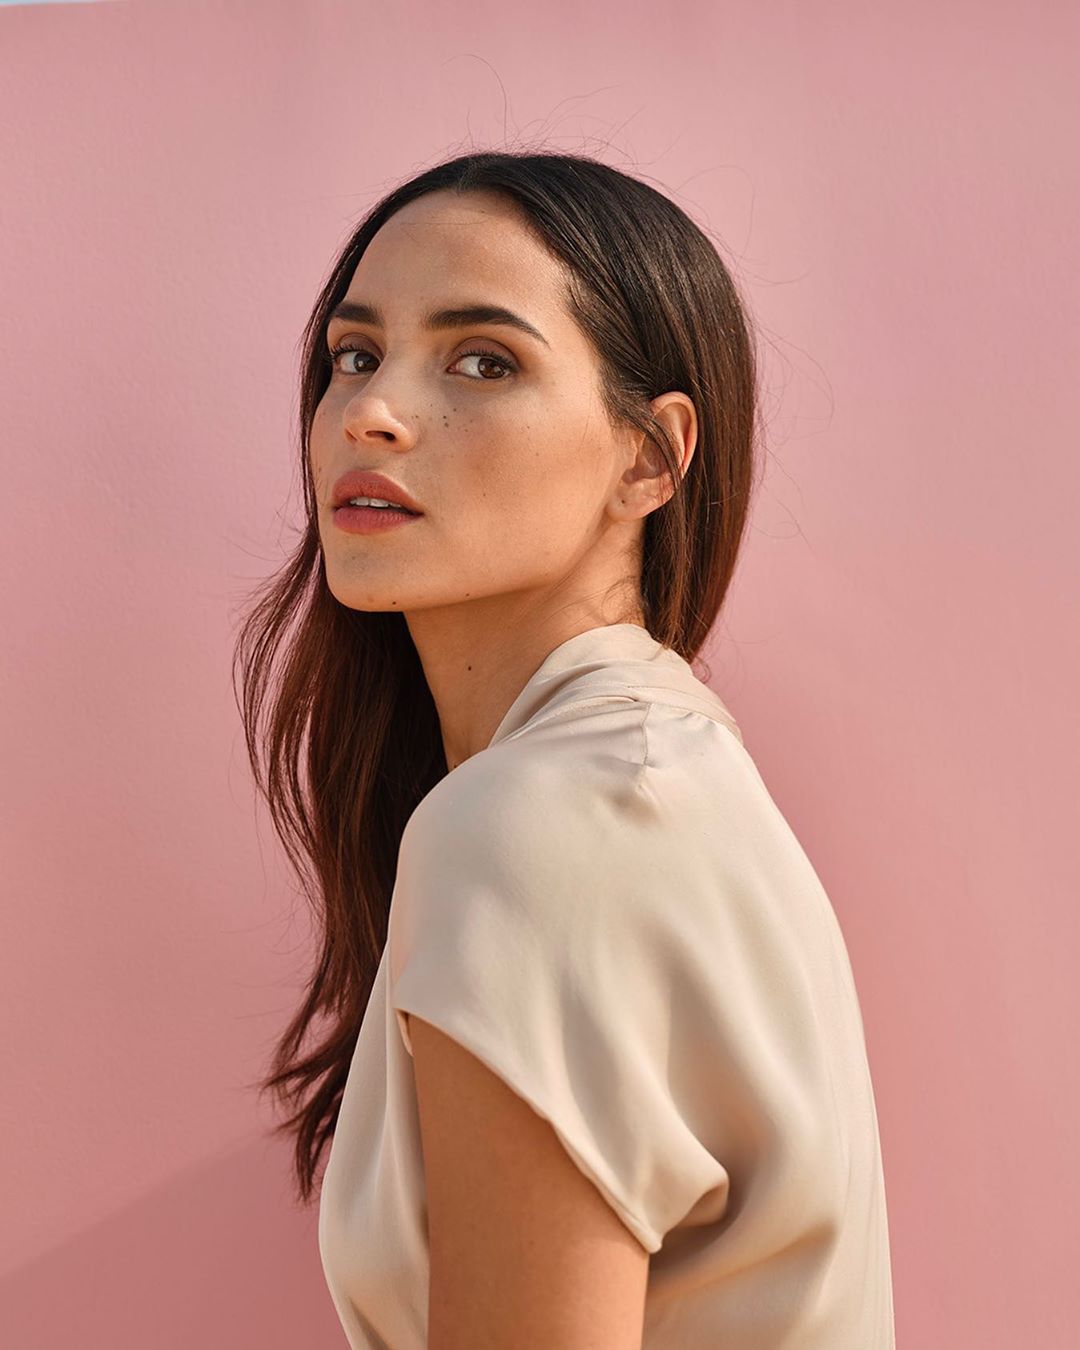 Armani beauty - She’s an actress, a muse, an independent spirit and blend of the best of different worlds. 

Meet Adria Arjona, the face of MY WAY, the new feminine fragrance by Giorgio Armani. She’s...